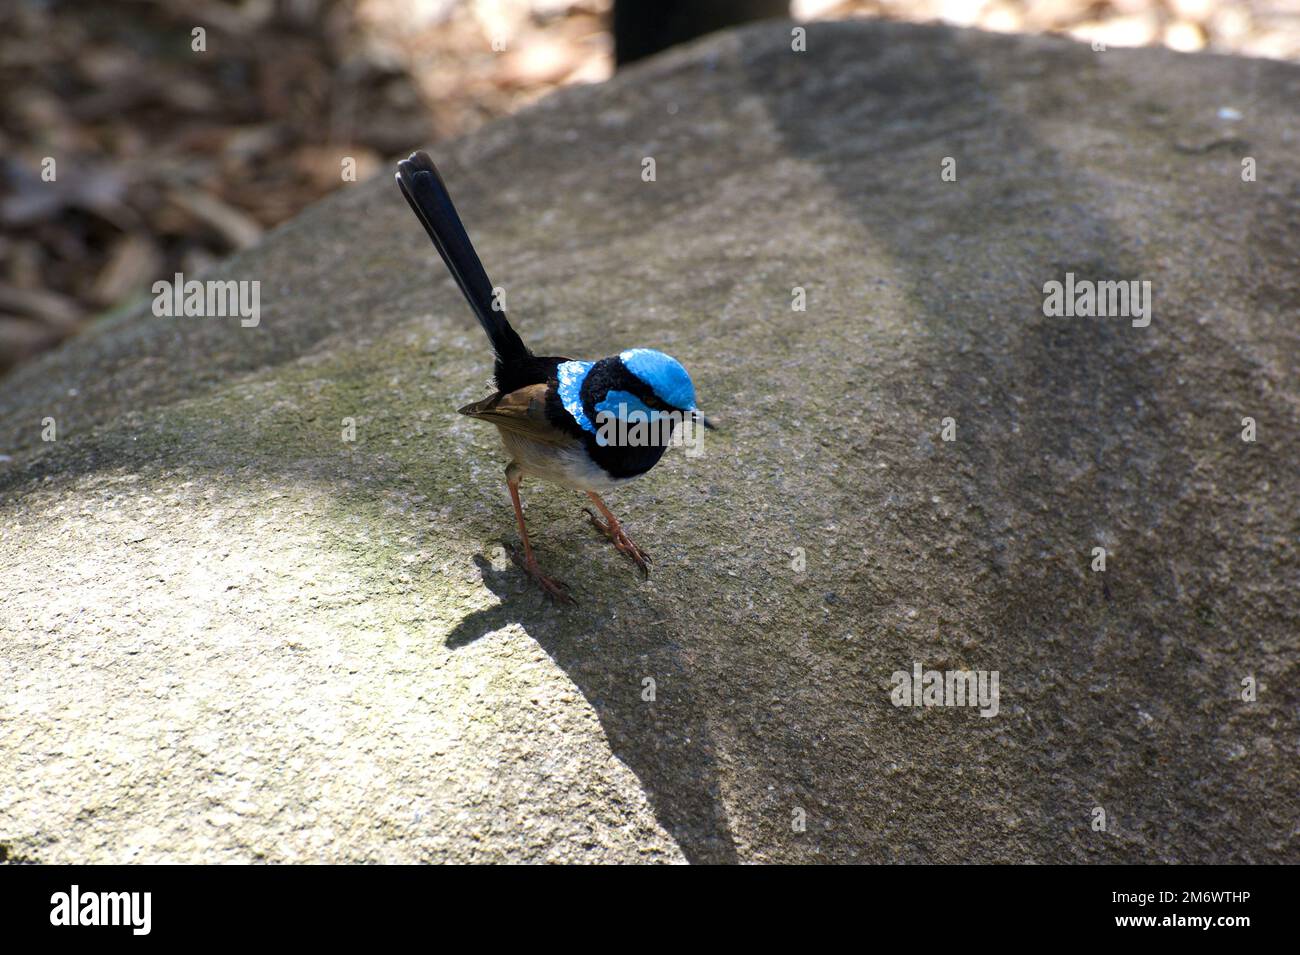 It's not often you get a clear shot of a Superb Fairy Wren (Malurus Cyaneus) - so I grabbed it while it was in the open. At Healesville Sanctuary, Stock Photo